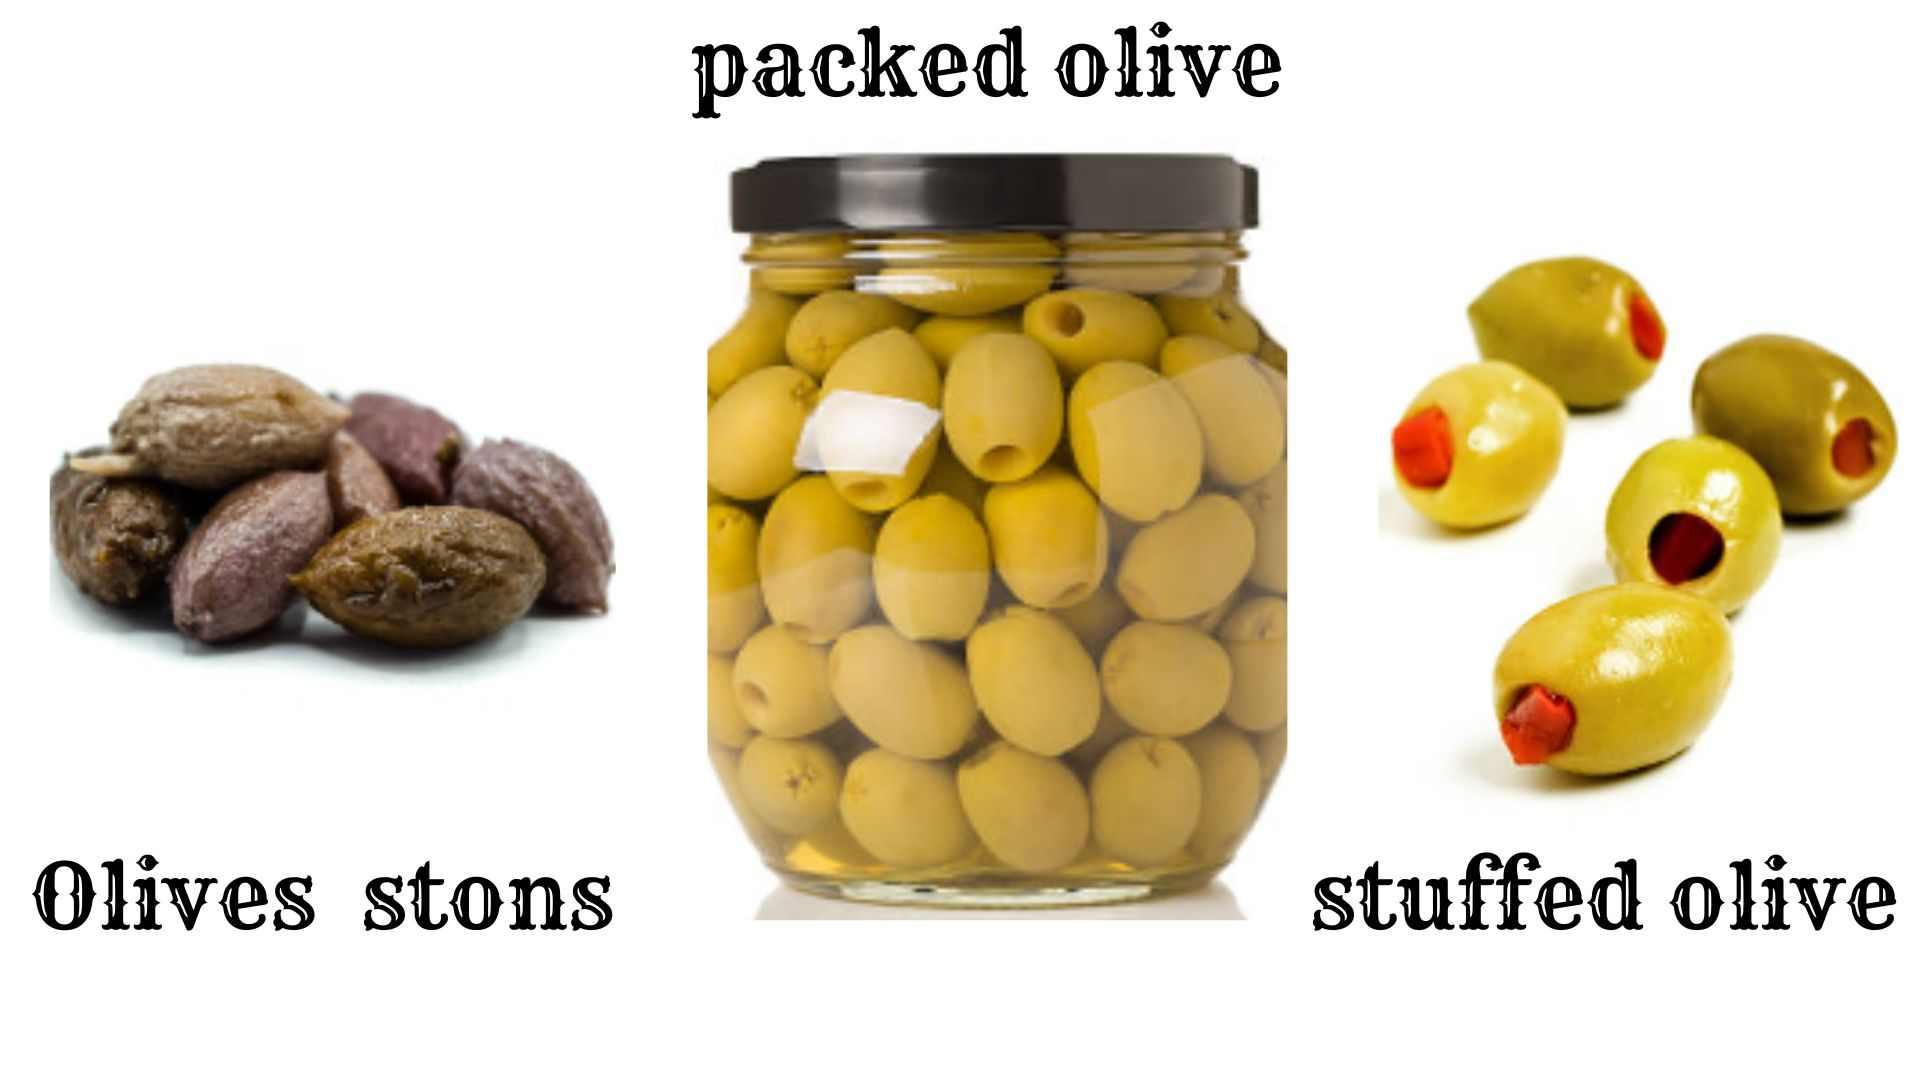 Side effects of feeding olives to your dog